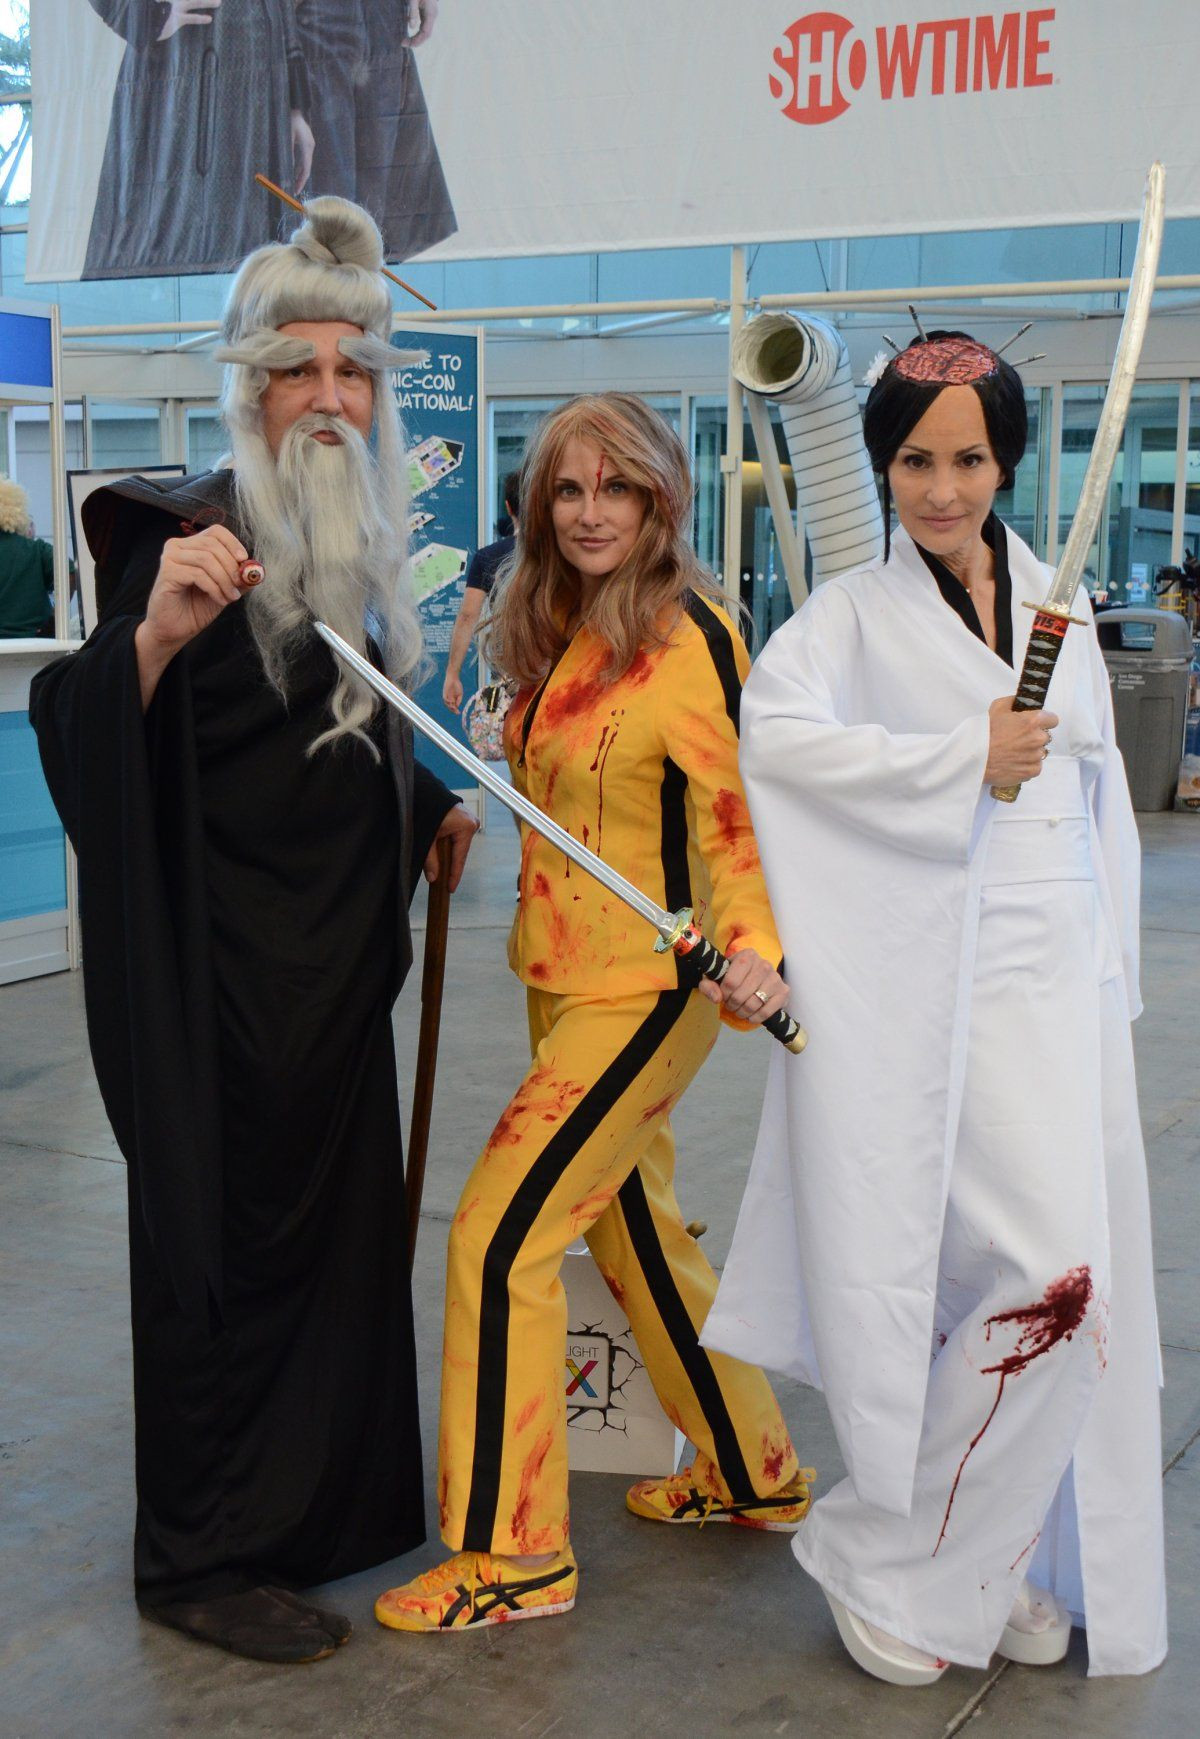 Kill Bill Costume DIY
 The absolute best cosplay photos from San Diego ic Con